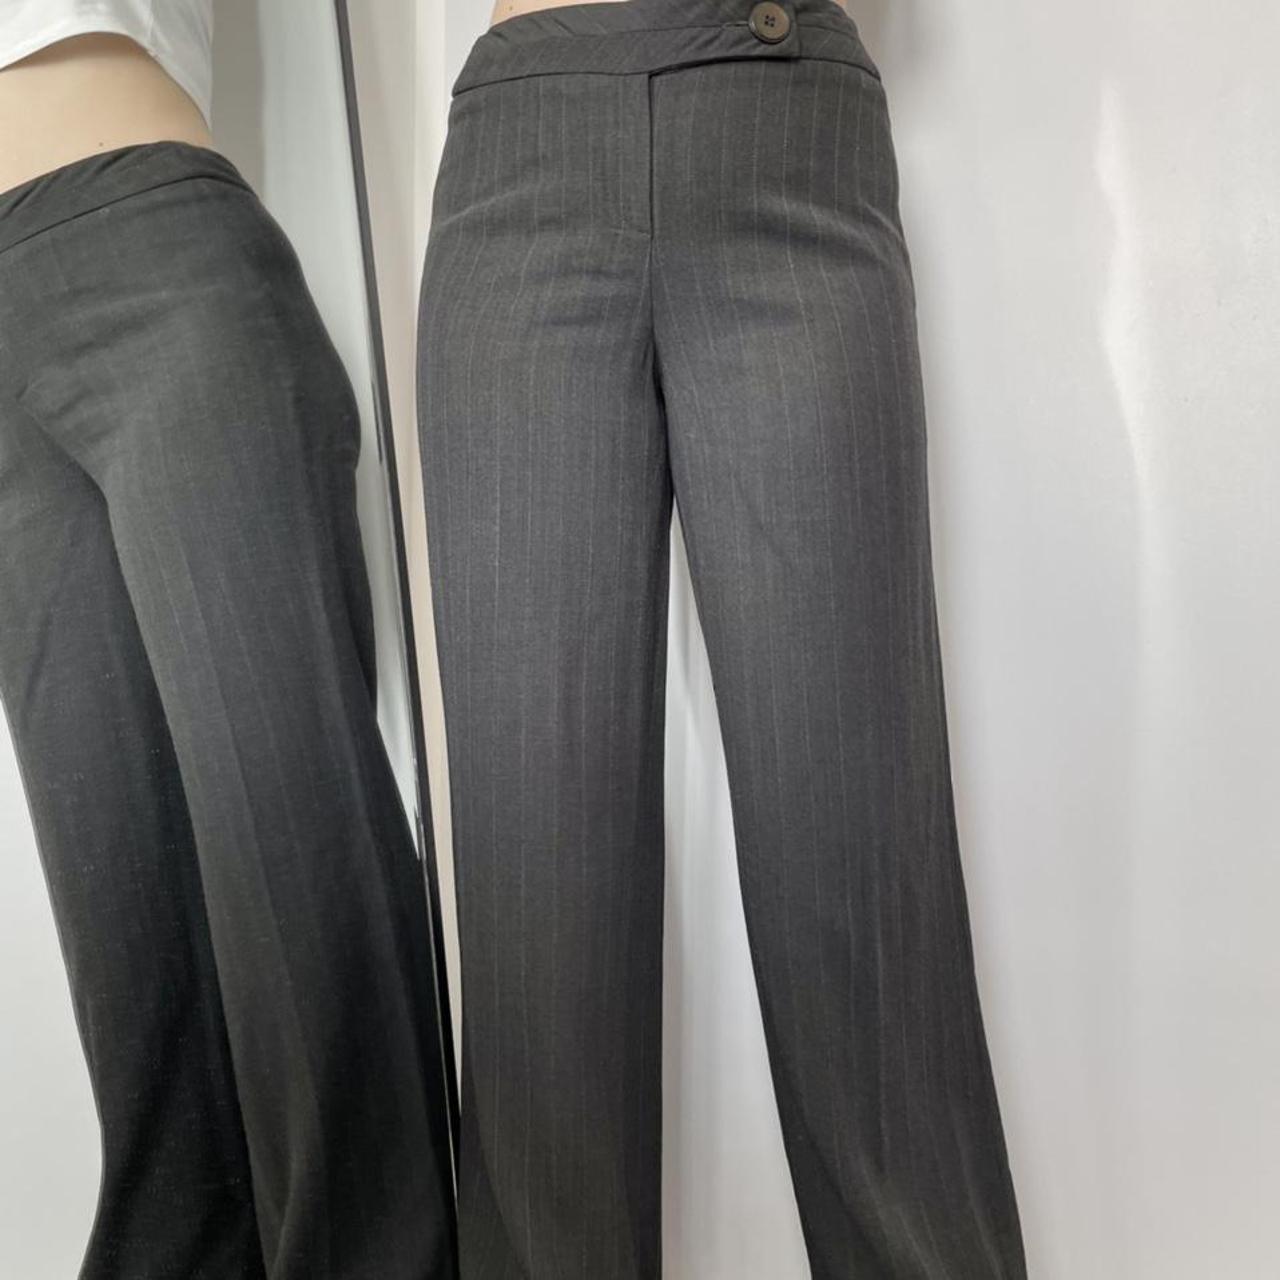 Product Image 4 - Petite pinstripe trousers

In excellent condition.

Material